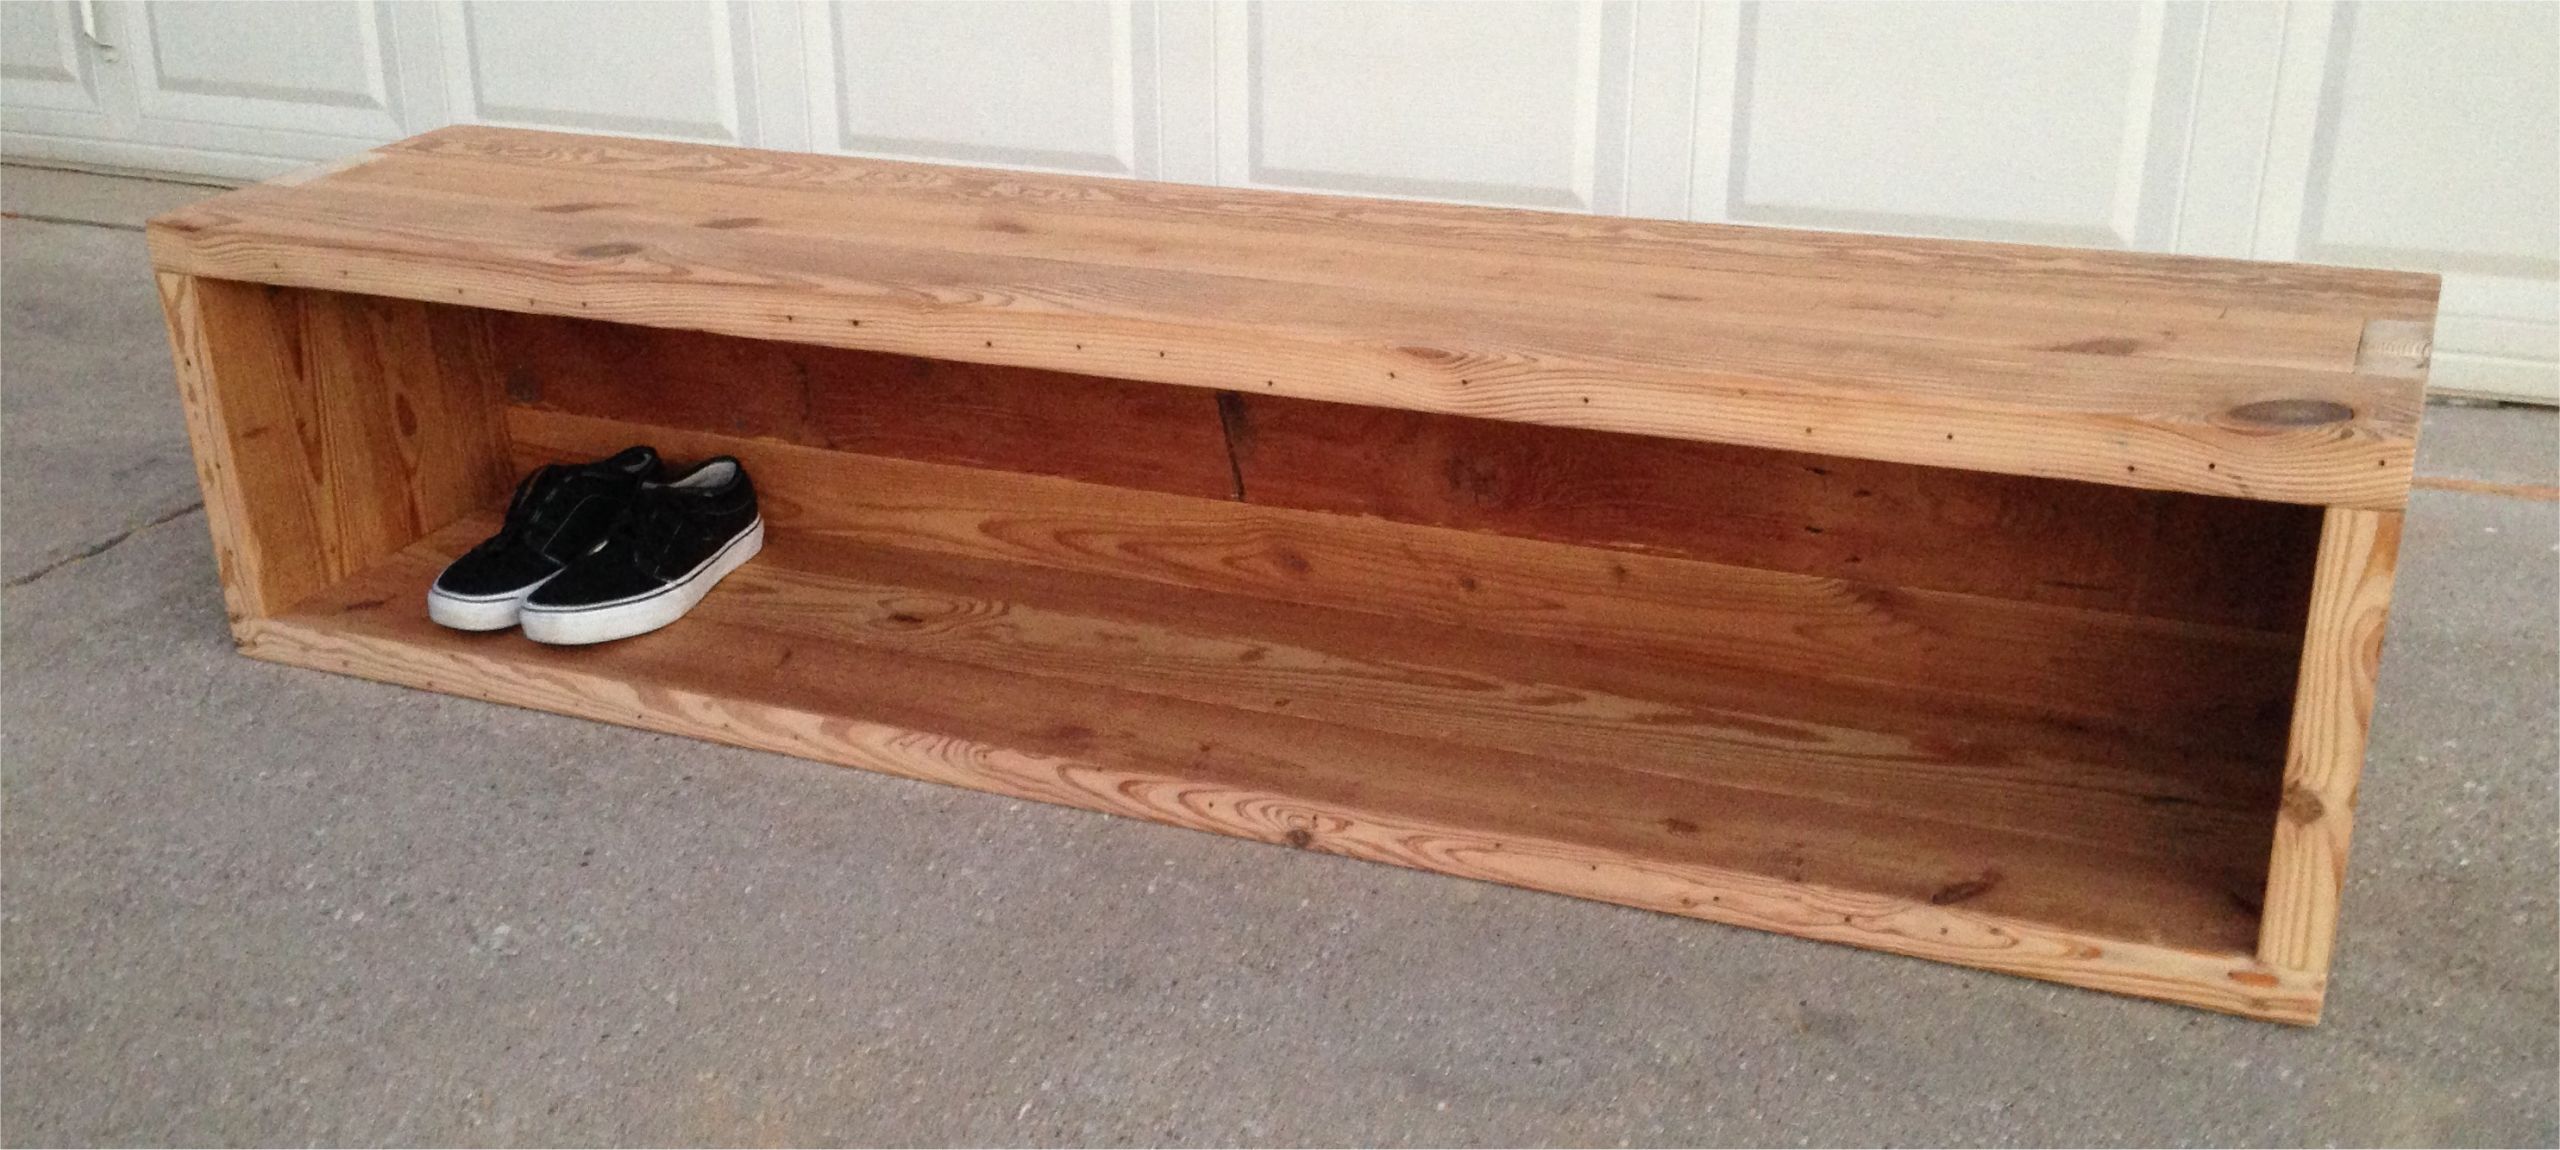 Wooden Bench With Storage Plans
 fine woodworking uk